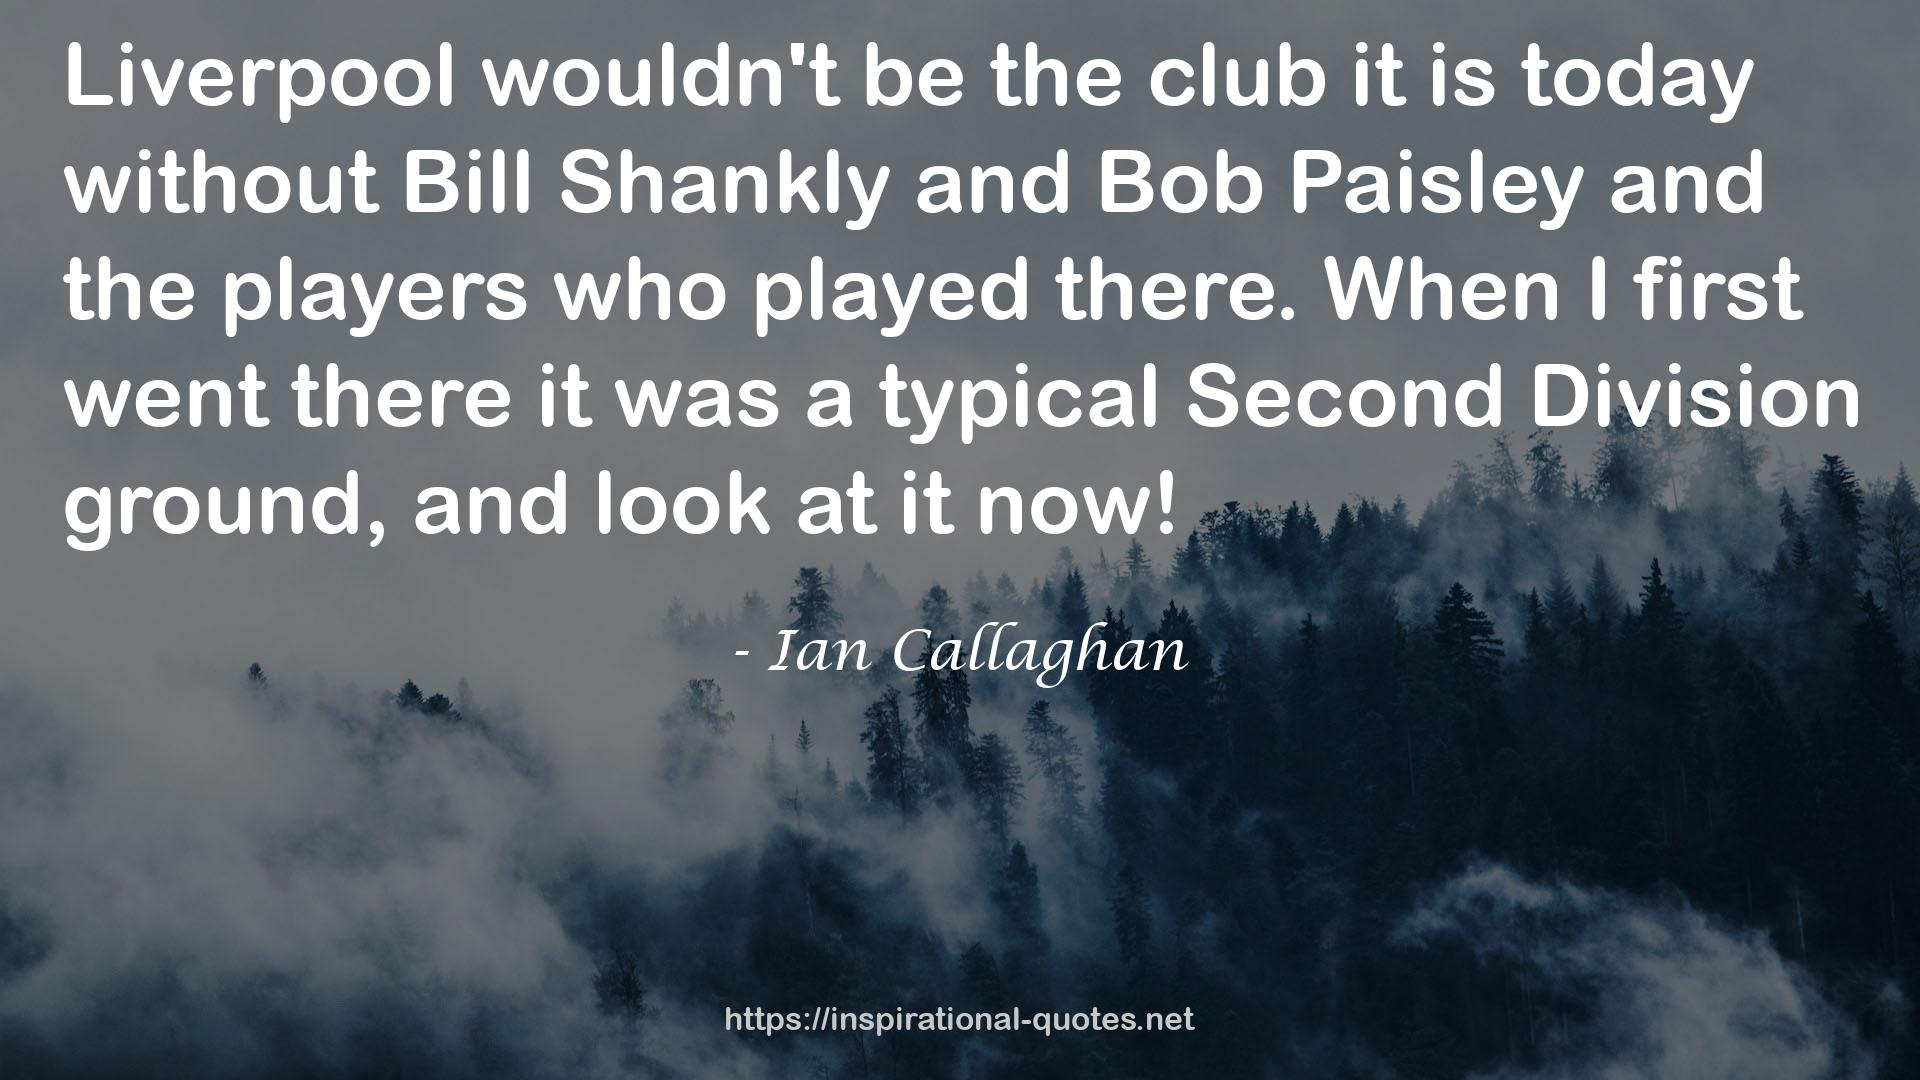 Ian Callaghan QUOTES